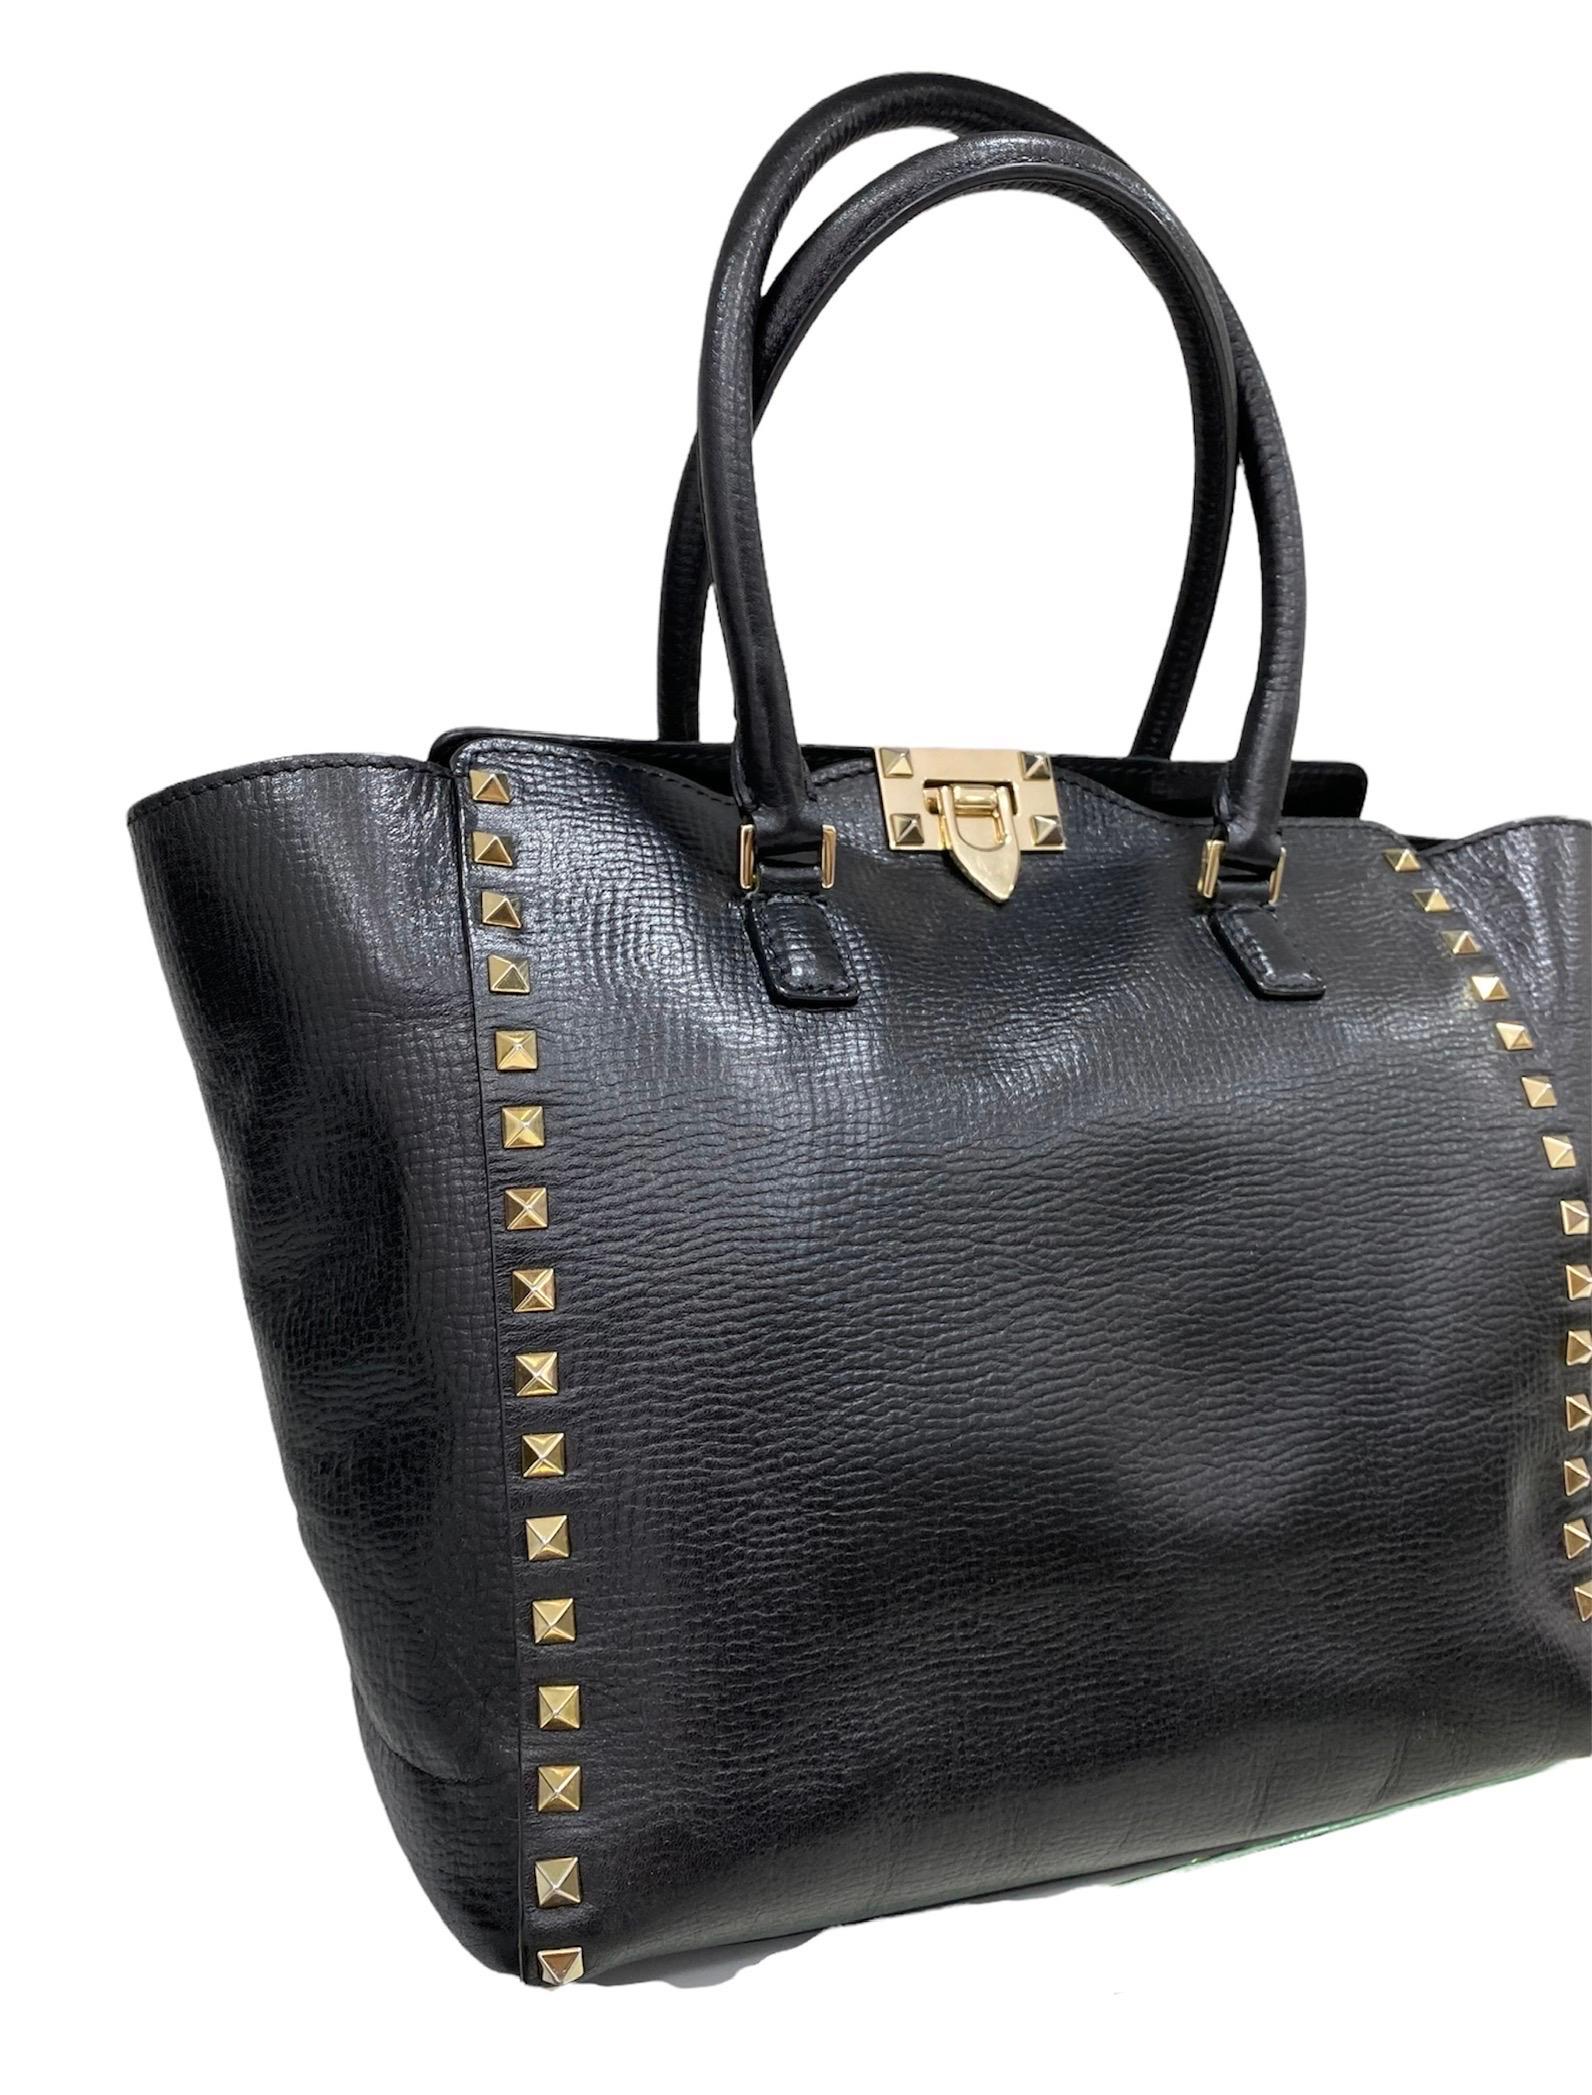 Valentino bag, Rockstud model, made of hammered black leather with golden hardware.

Equipped with a zip and interlocking closure, internally lined in black suede, very roomy.

Equipped with a double rigid leather handle and a removable thin